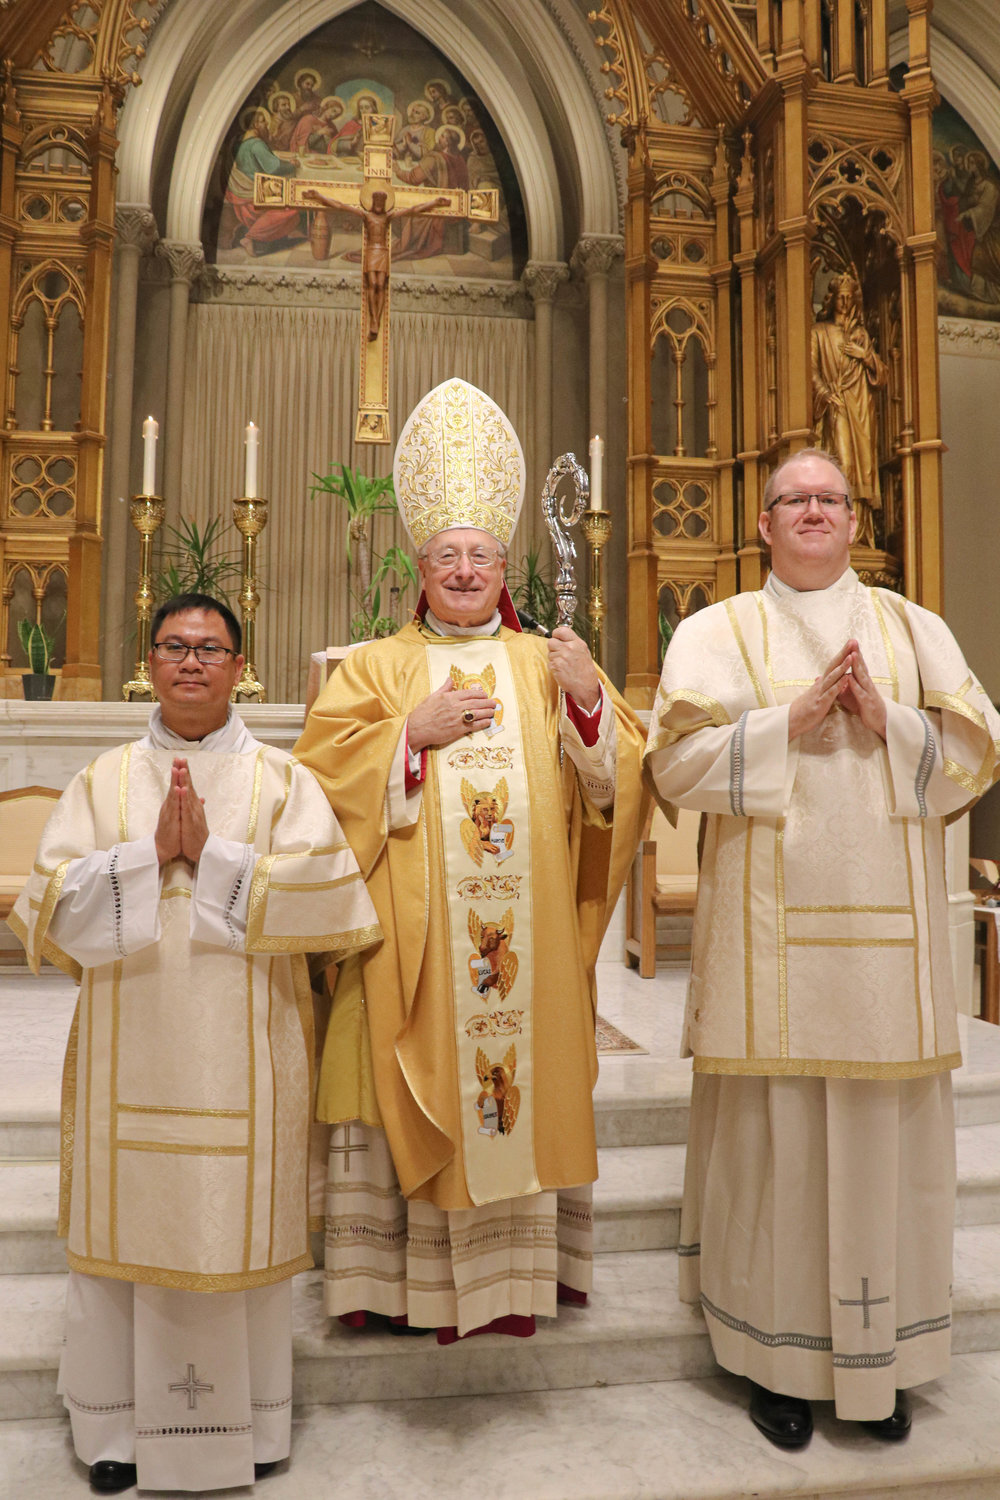 Rev. Mr. Daniel M. Mahoney and Rev. Mr. Doan V. Nguyen are ordained to the Sacred Order of Deacon through the imposition of hands and the invocation of the Holy Spirit, by Auxiliary Bishop Robert C. Evans on Saturday, Sept. 26 at the Cathedral of Saints Peter and Paul, Providence.